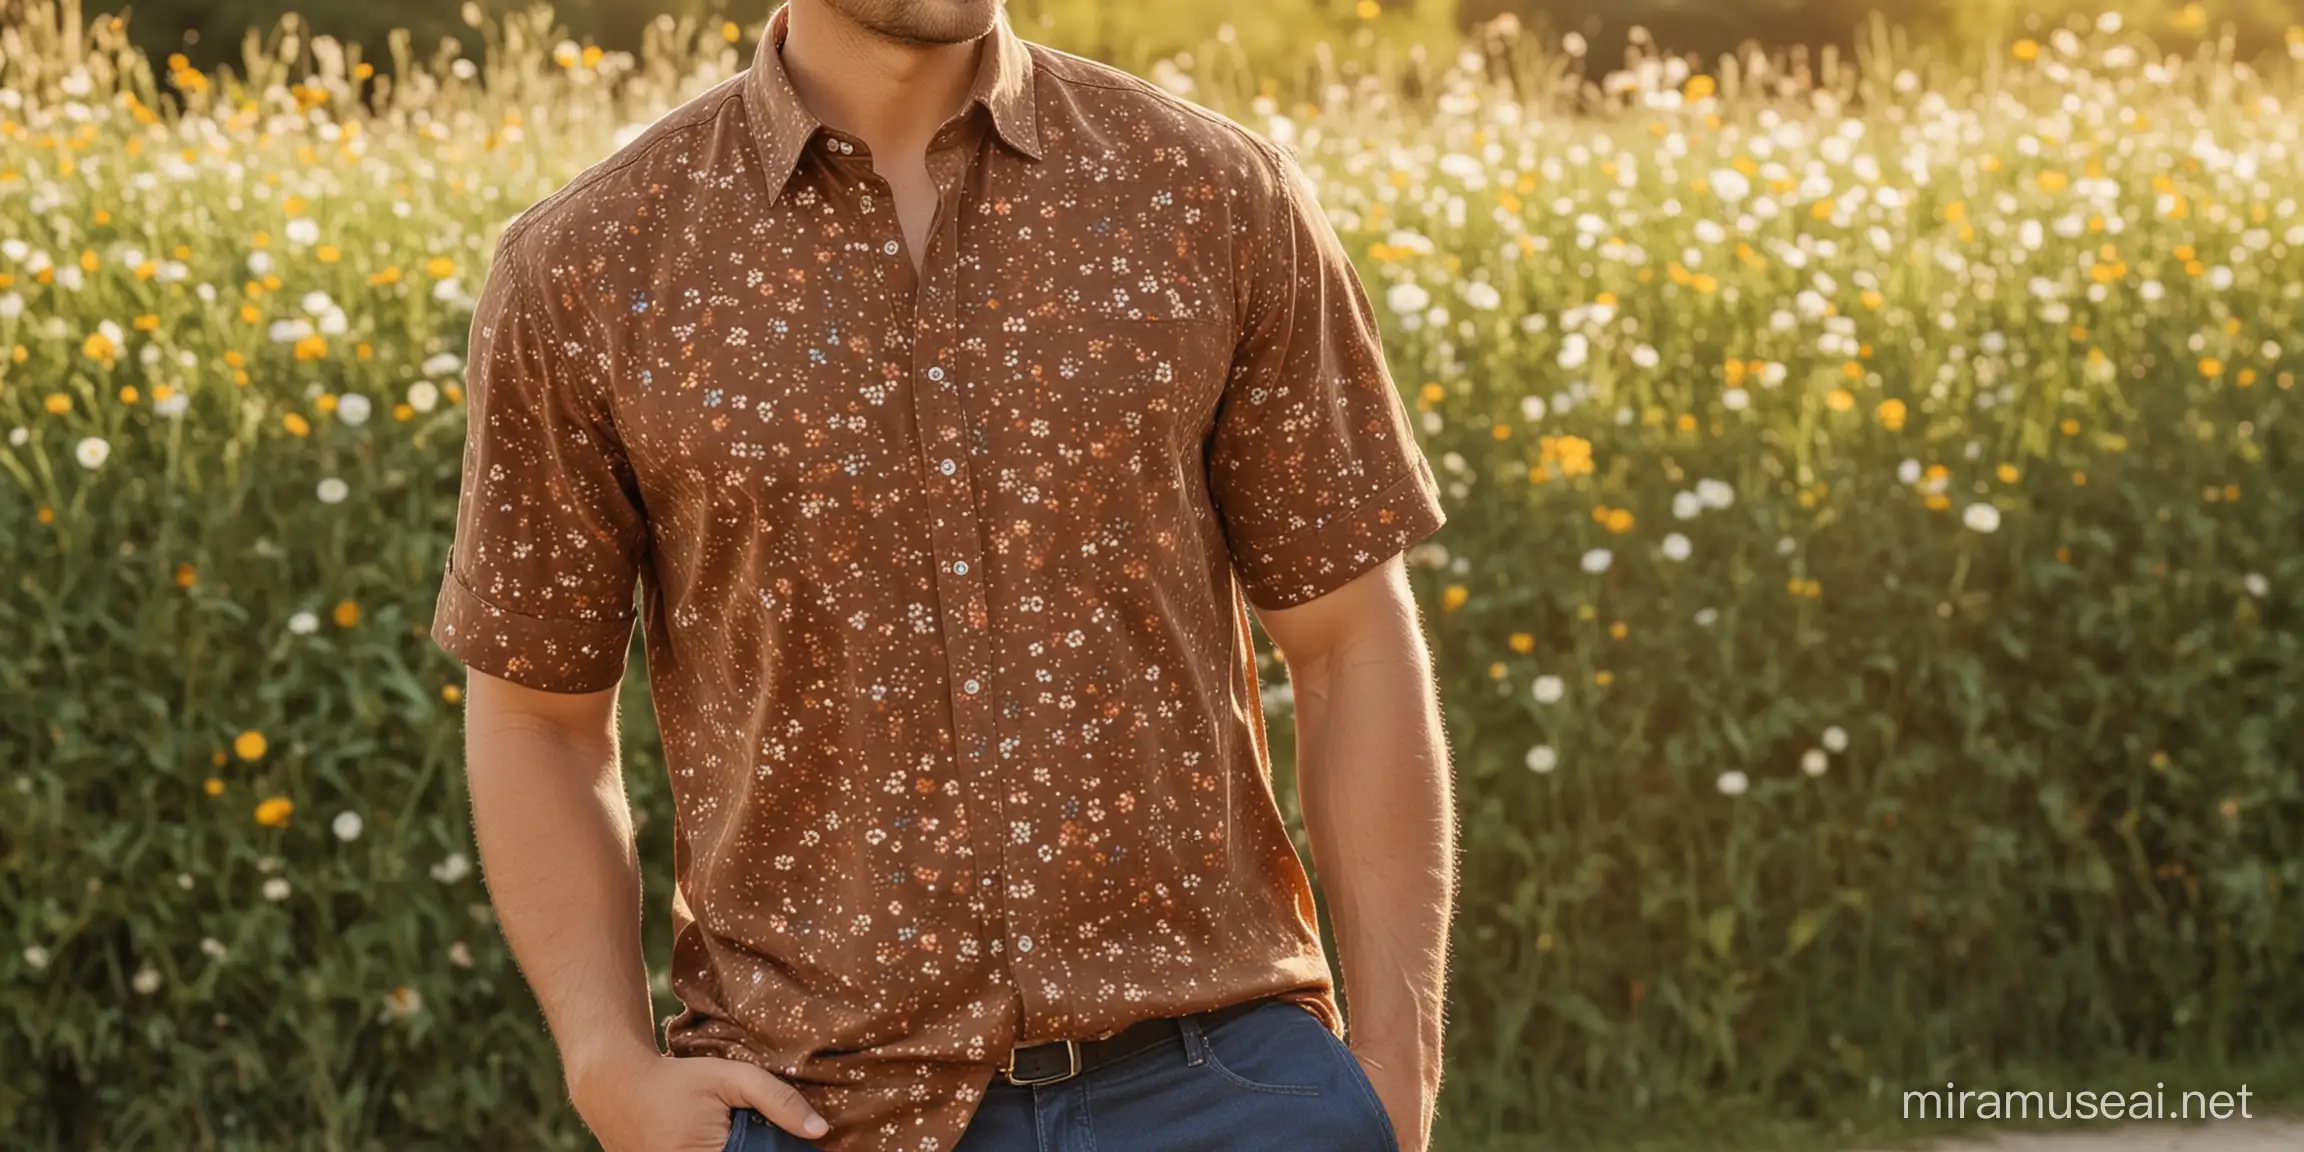 Stylish Man in Floral Patterned Brown Shirt Against Blurred Summer Background